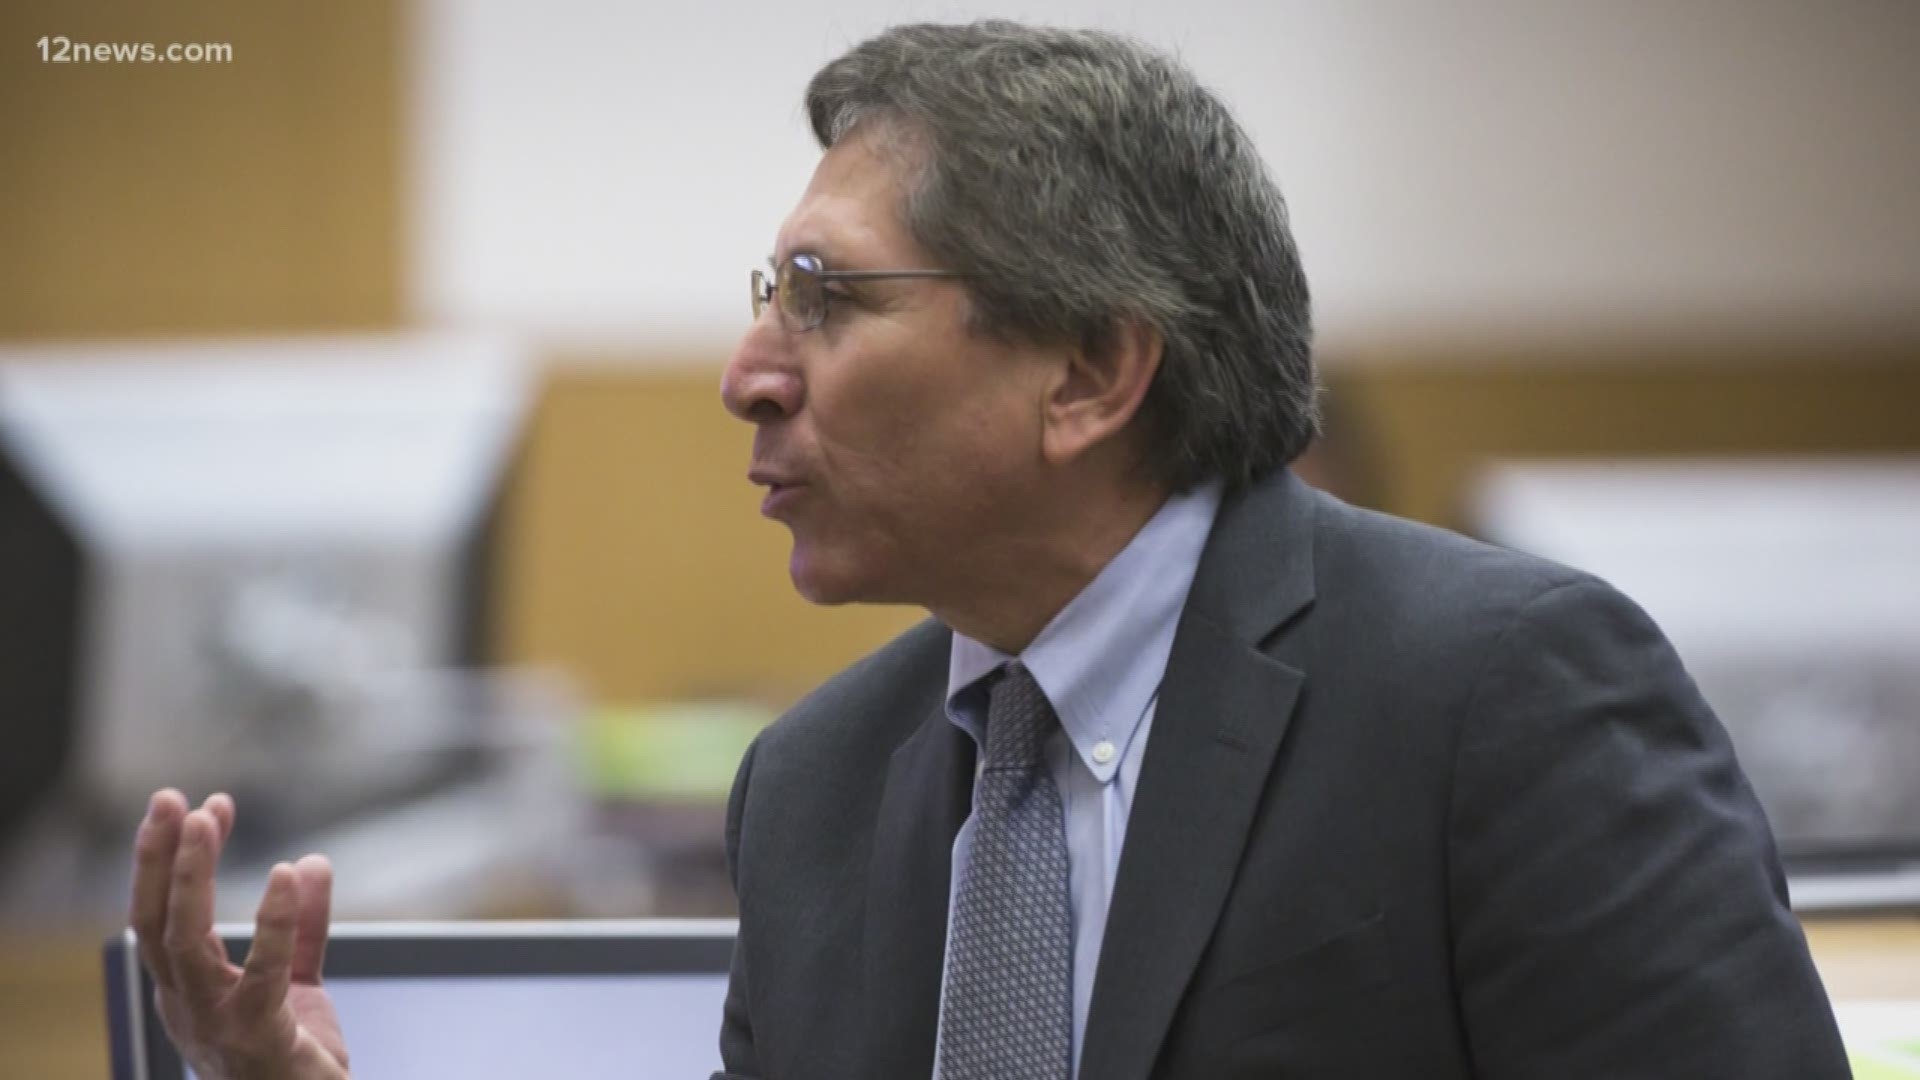 Juan Martinez faces a disciplinary hearing in late August over allegations of sexual misconduct and sexual harassment. A woman named Jen Wood helped make Juan Martinez a star when she was blogging the Jodi Arias trial. 12 News has learned Wood is expected to testify against Martinez at that disciplinary hearing.